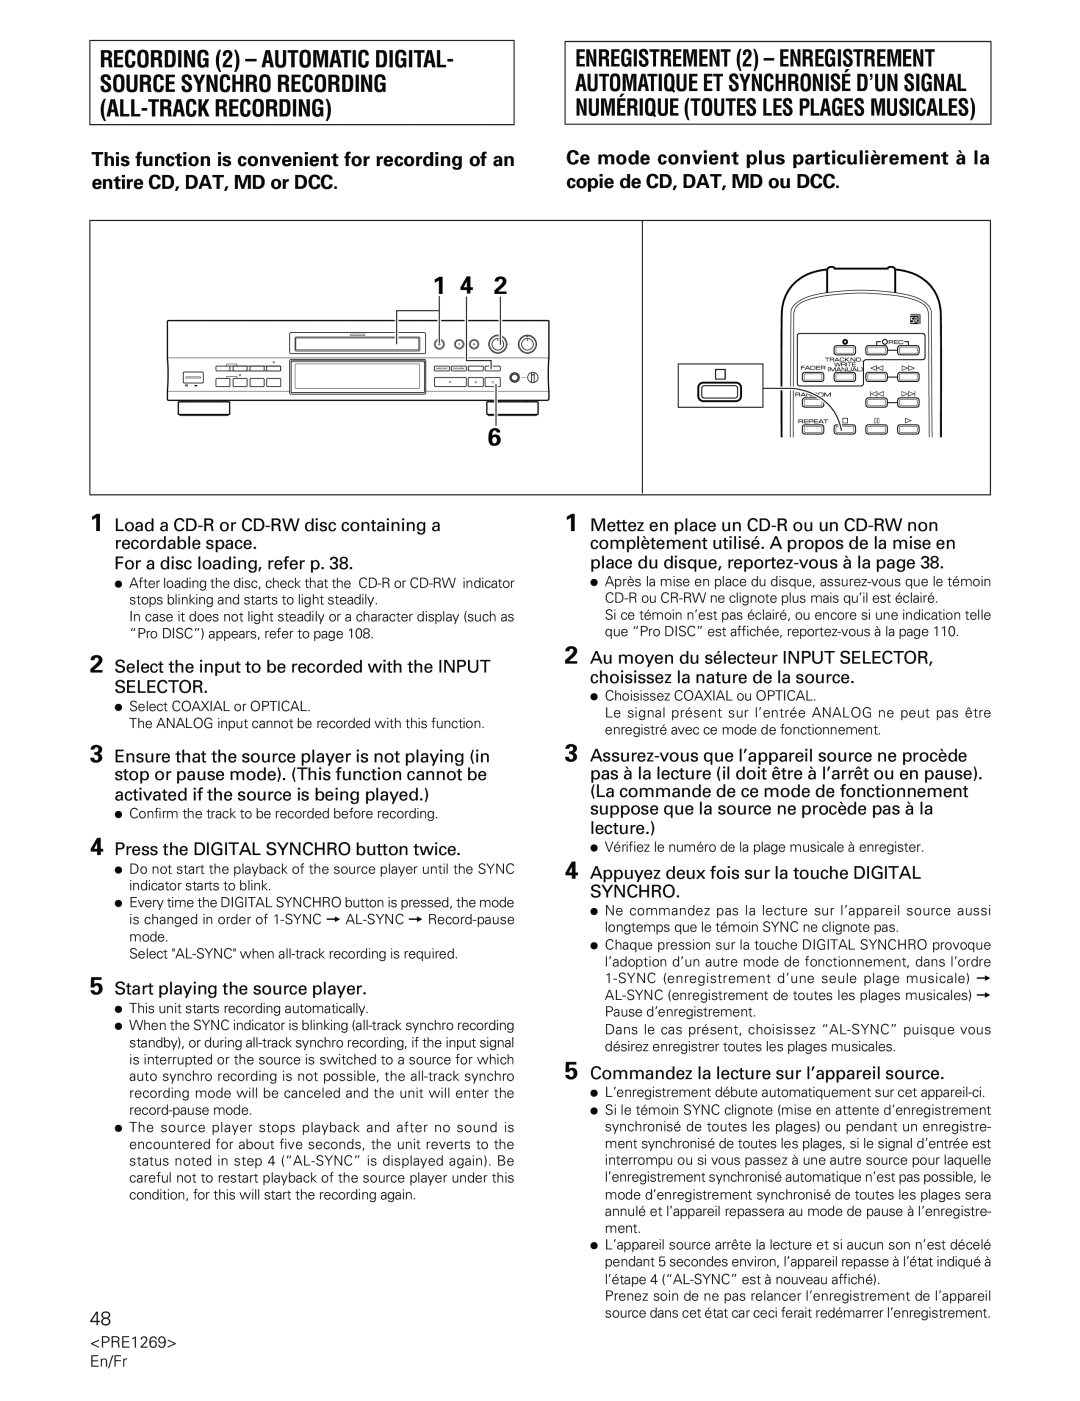 Pioneer PDR-555RW operating instructions 1 4 6, For a disc loading, refer p 